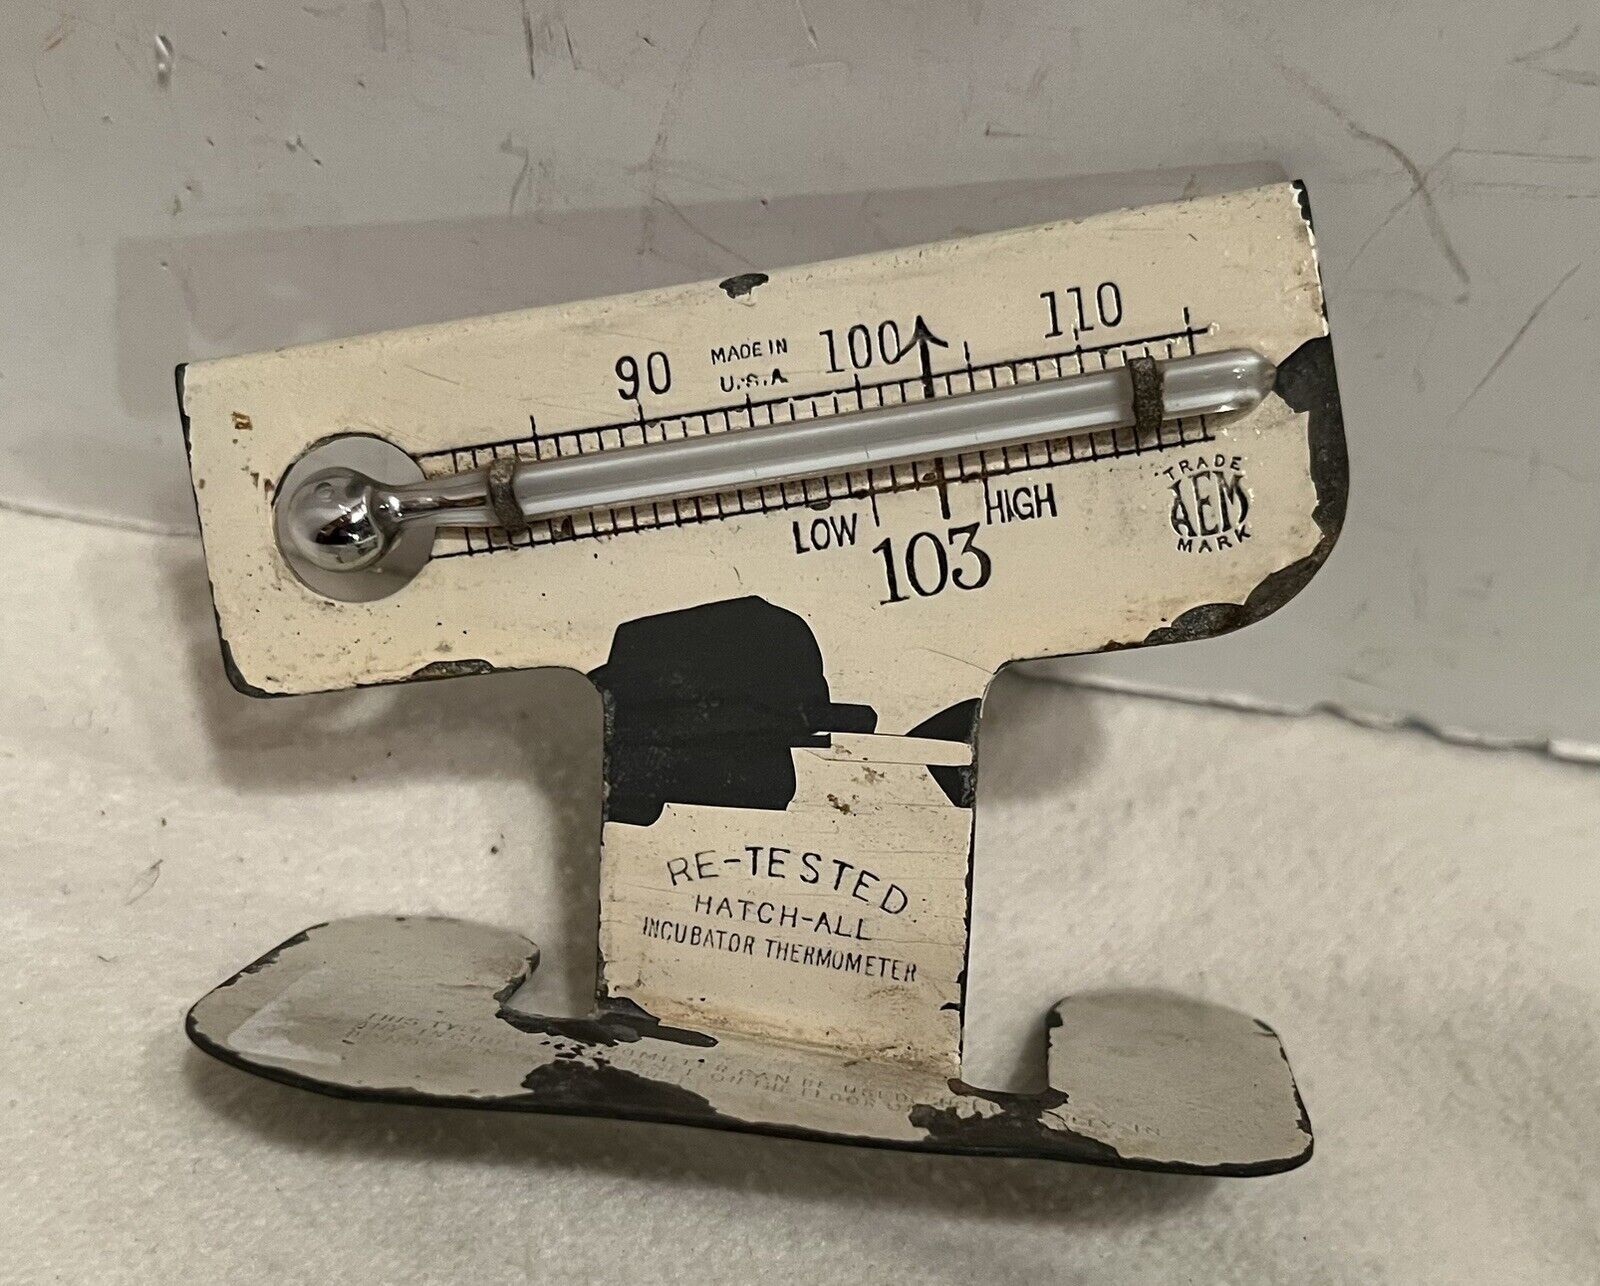 Vintage RE-TESTED MATCH ALL Incubator Thermometer